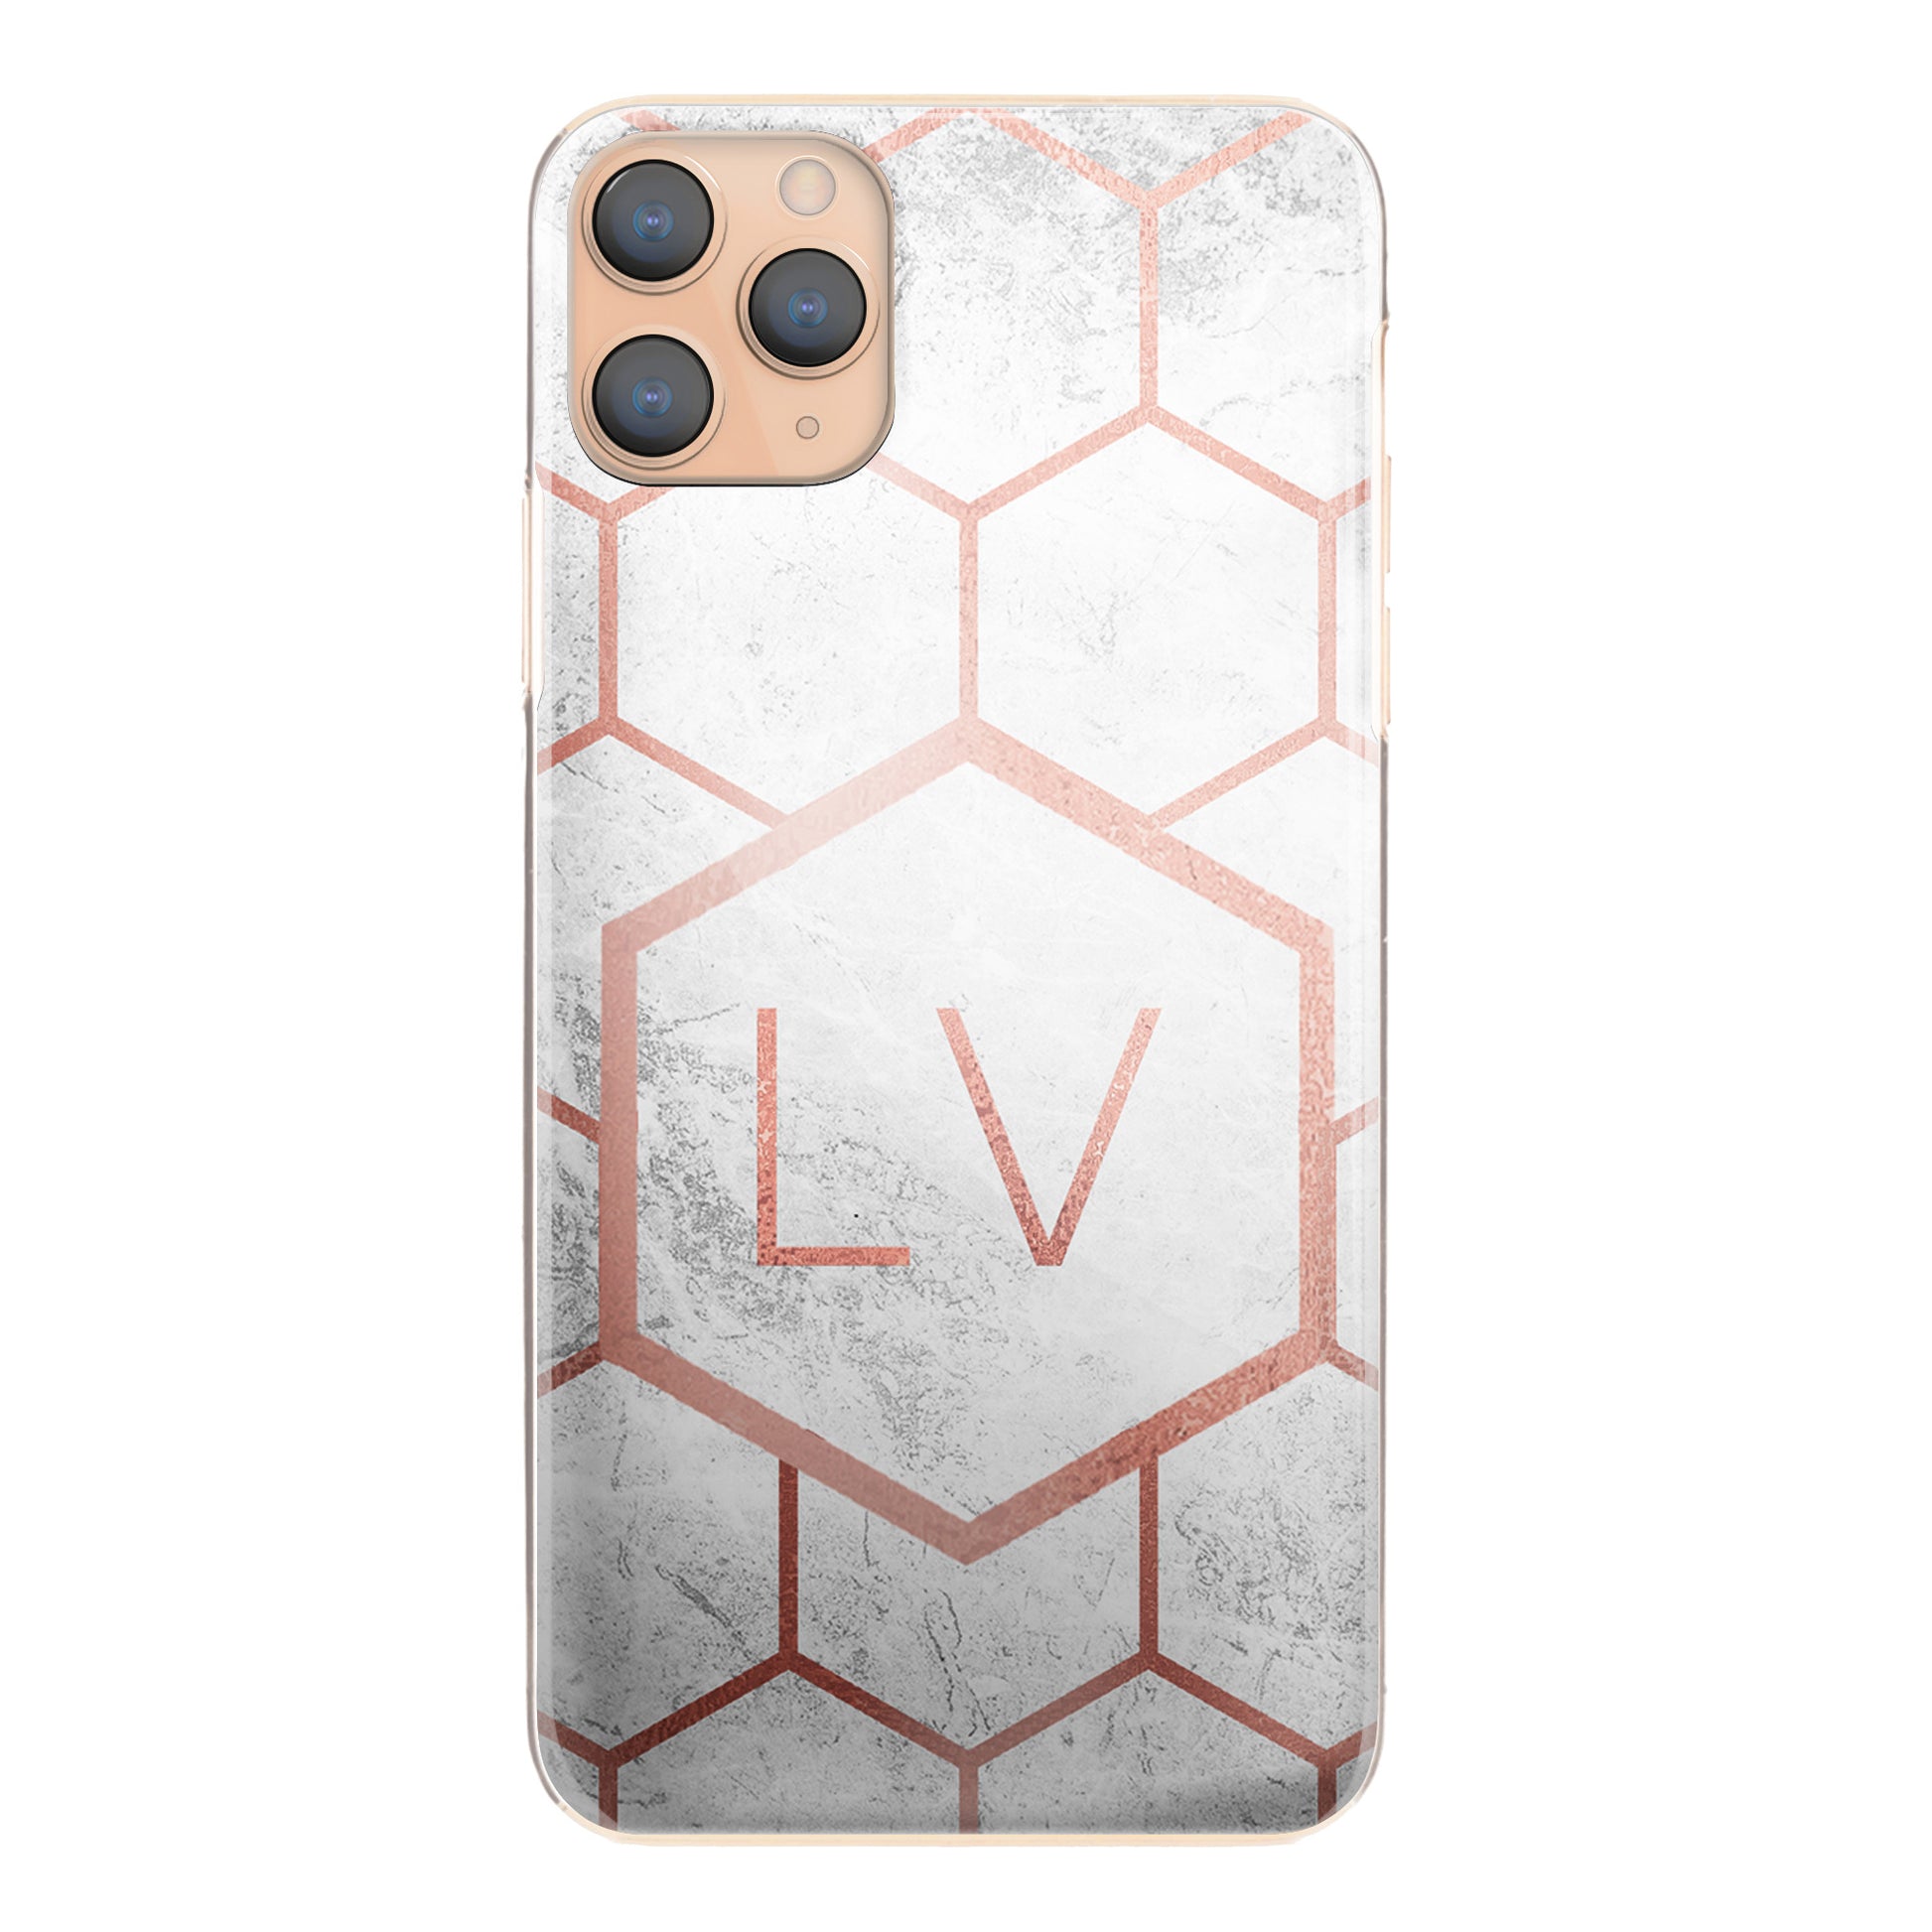 Personalised Motorola Phone Hard Case with Pink Initials and Honeycomb Pattern on Grey Marble